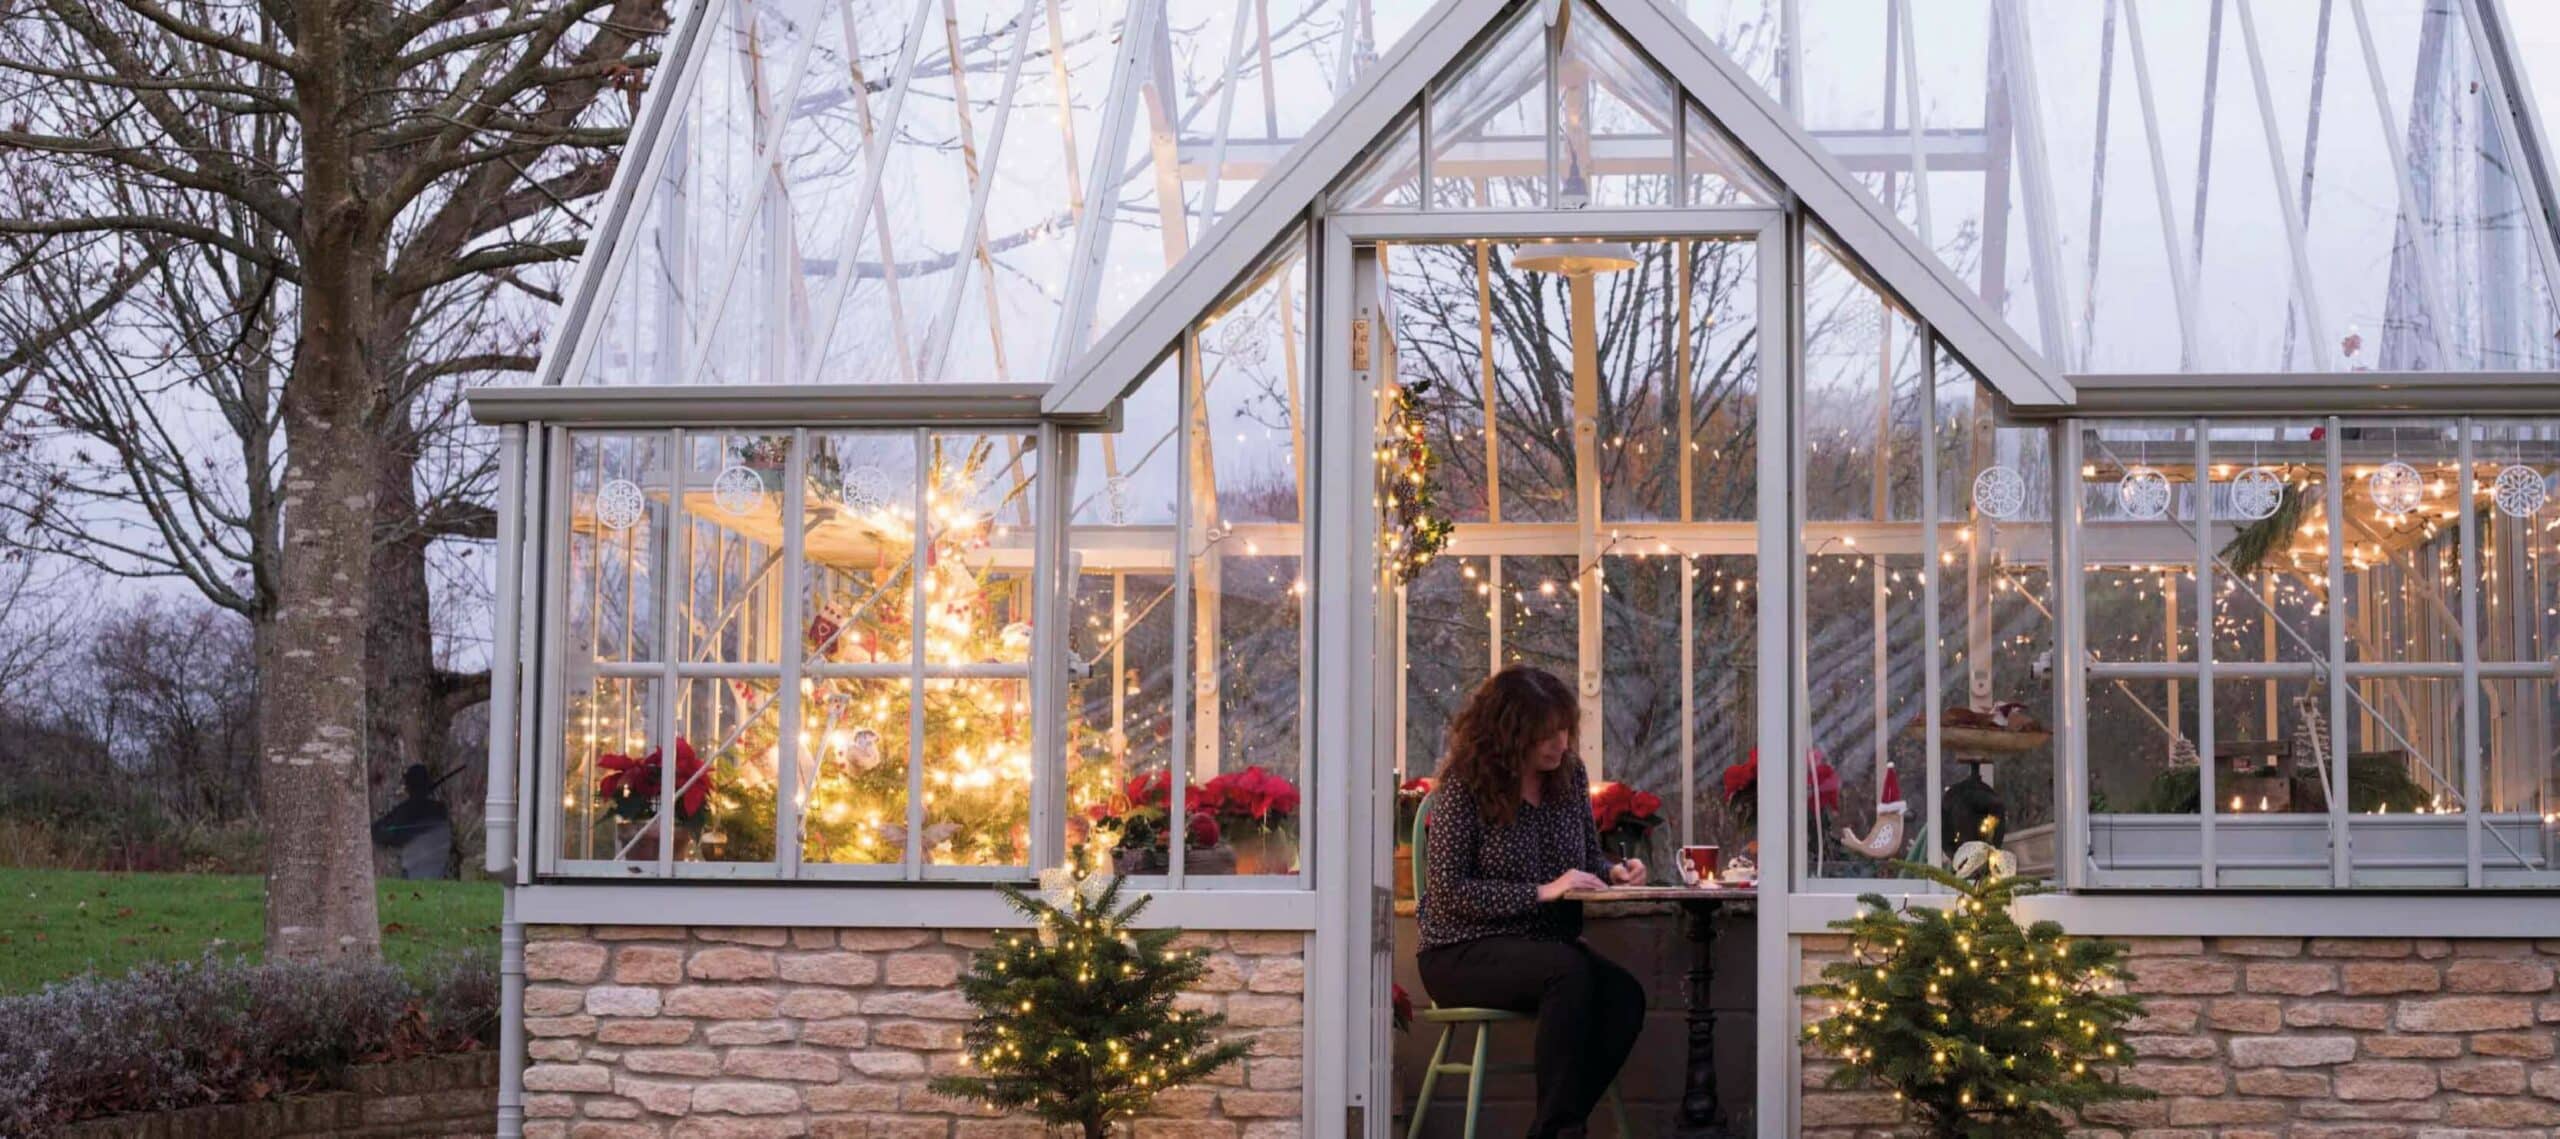 Lady in greenhouse at christmas